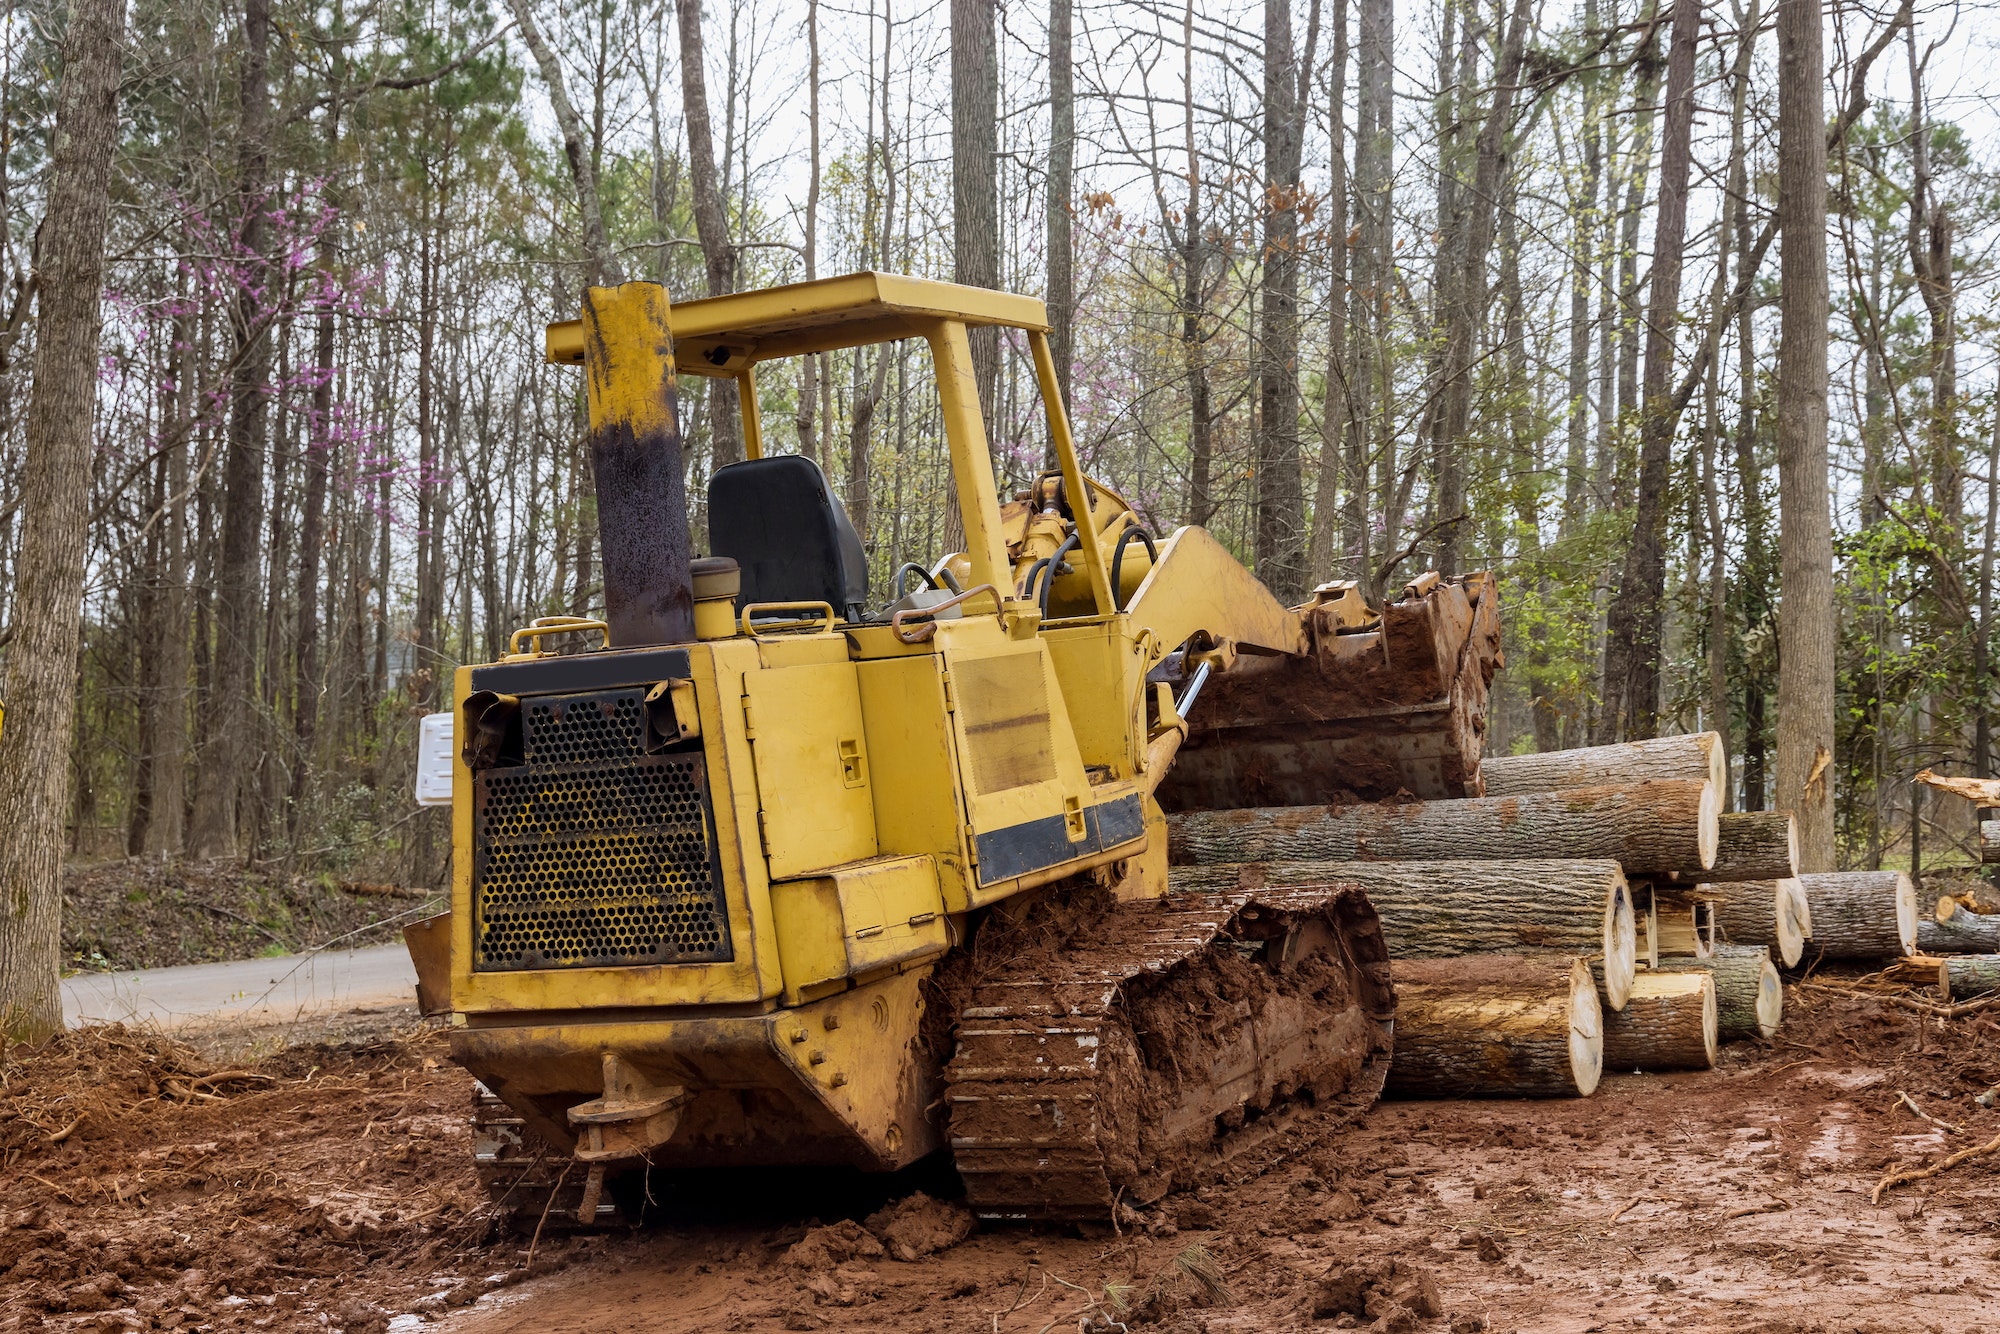 Freshly cut trees for residential construction in backhoe clearing forest on land clearing